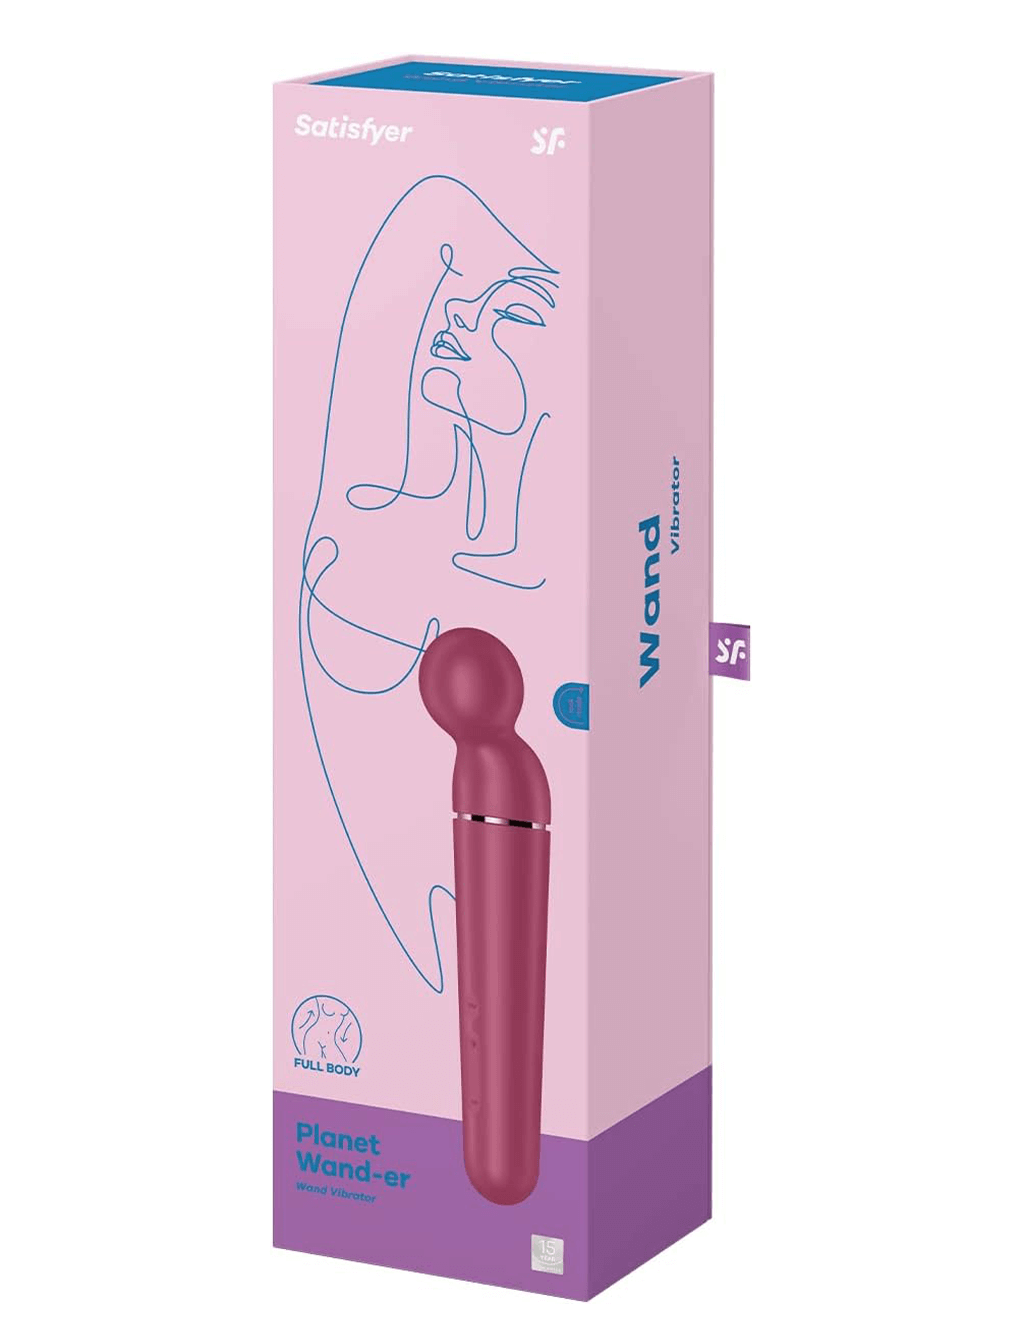 Satisfyer Planet Wand-er Massager Wand Vibrator - Berry Package